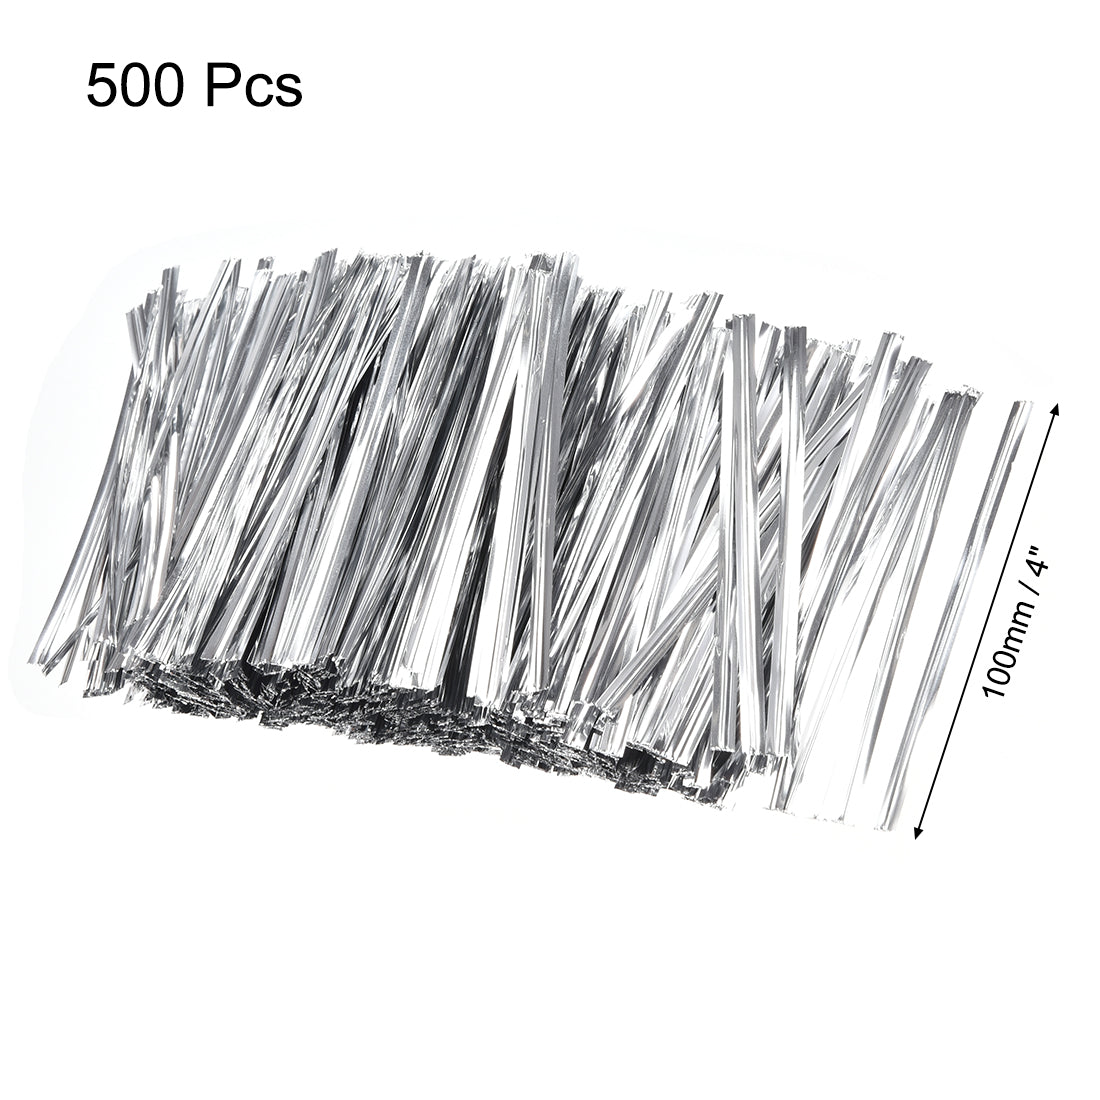 uxcell Uxcell Long Strong Twist Ties 4 Inches Quality Plastic Closure Tie for Tying Gift Bags Art Craft Ties Manage Cords Silvery 500pcs